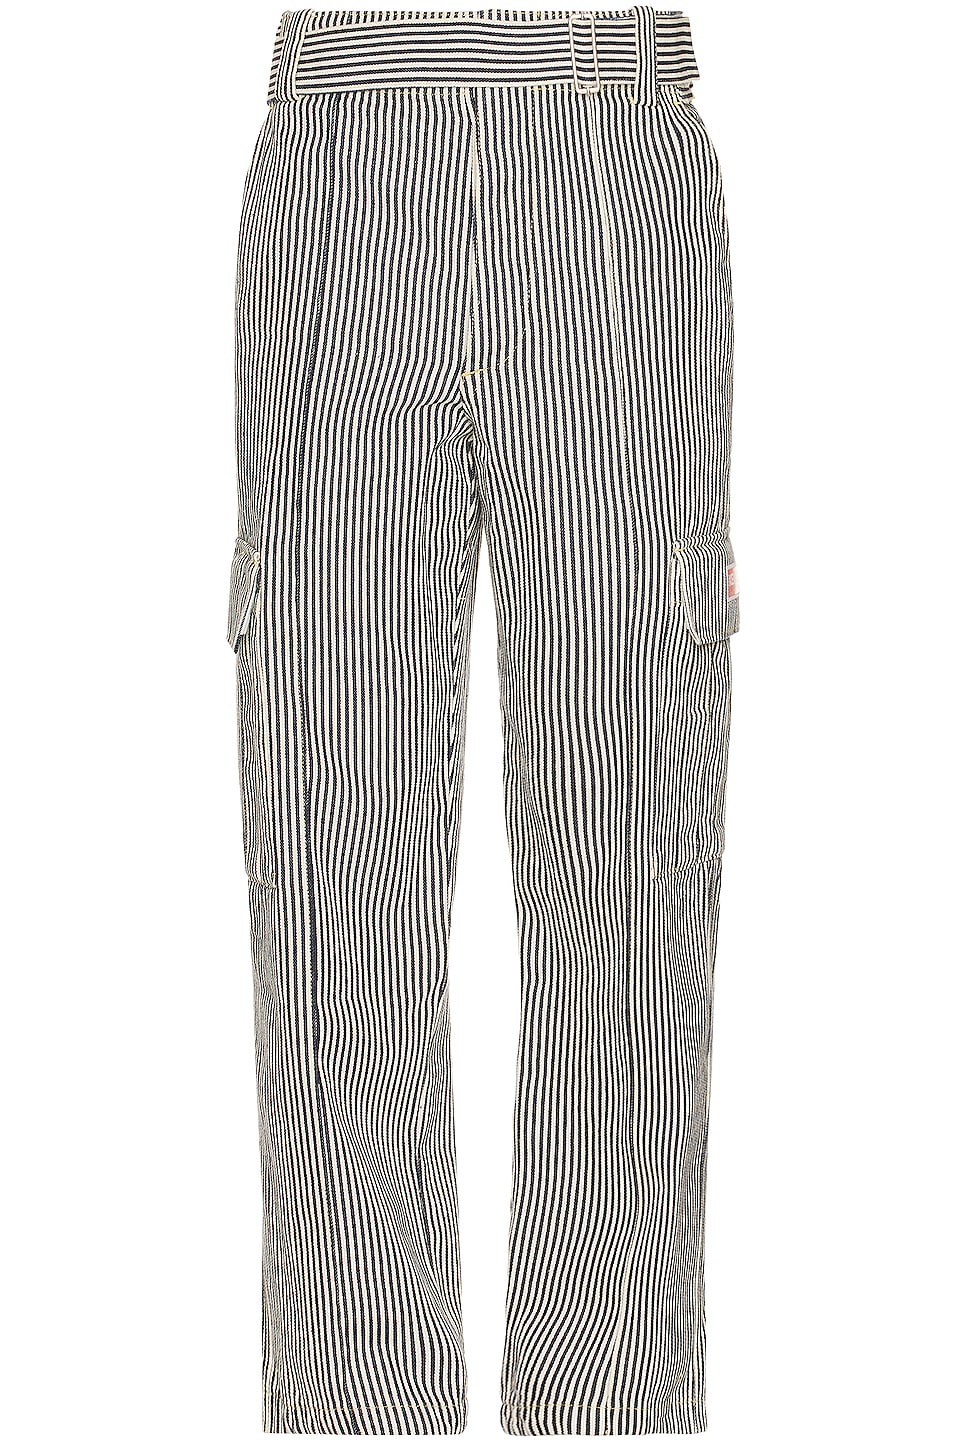 Image 1 of Kenzo Striped Army Straight Jeans in Rinse Blue